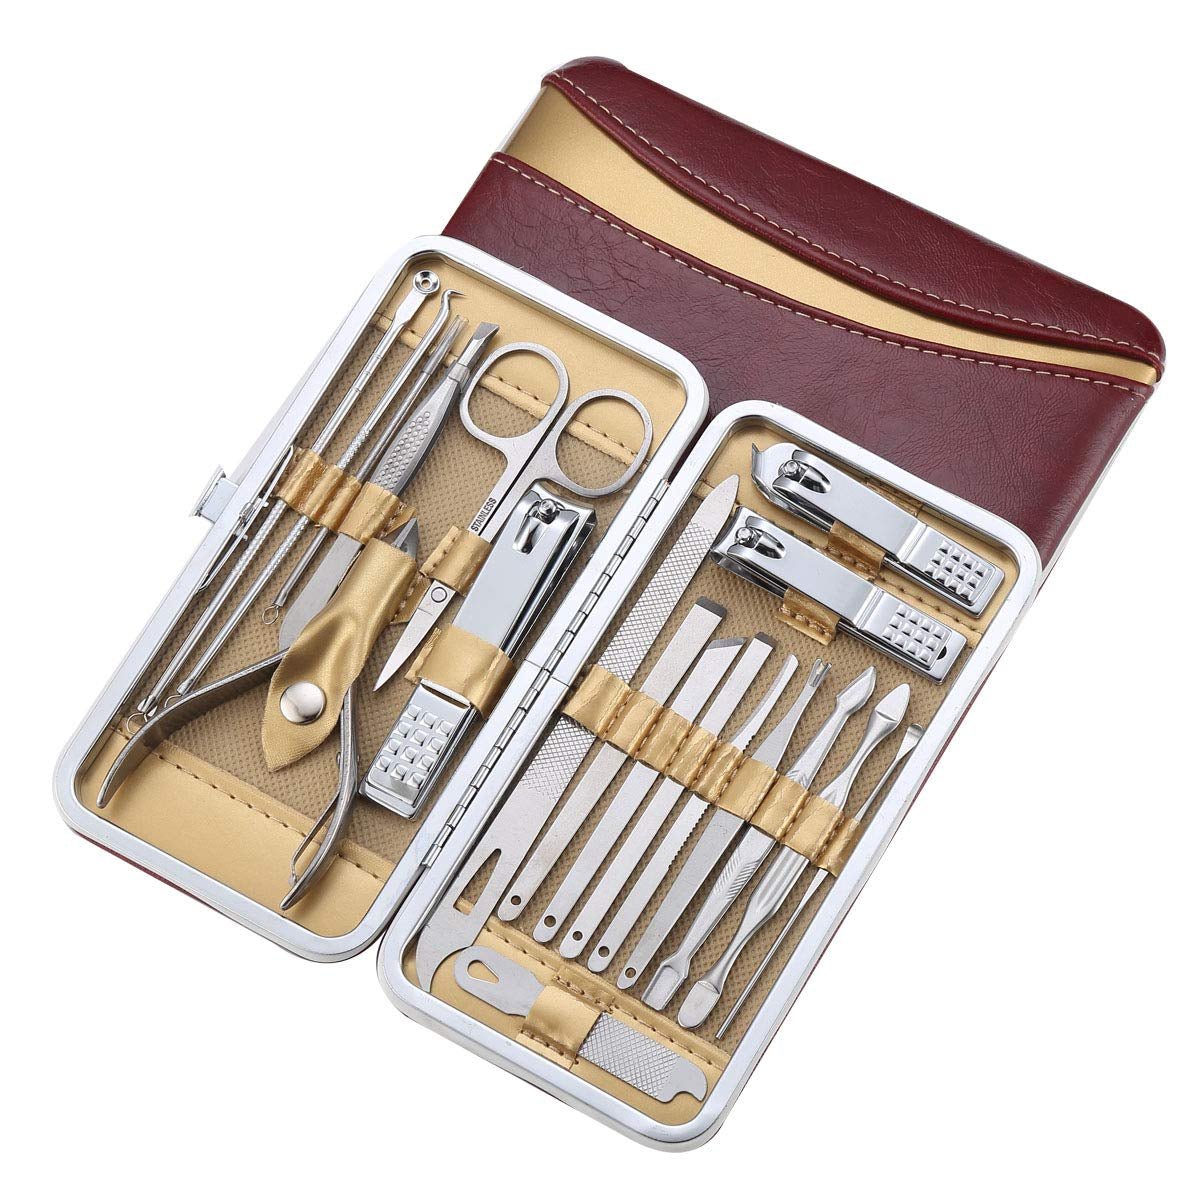 Manicure Set Pedicure Kit Professional 19 Pcs Nail Clipper for Men & Women Stainless Steel Sharp Cutter Grooming Nose Hair Scissors…Black Fingernails & Toenails with Portable Case (Wine Red_19 Pieces)